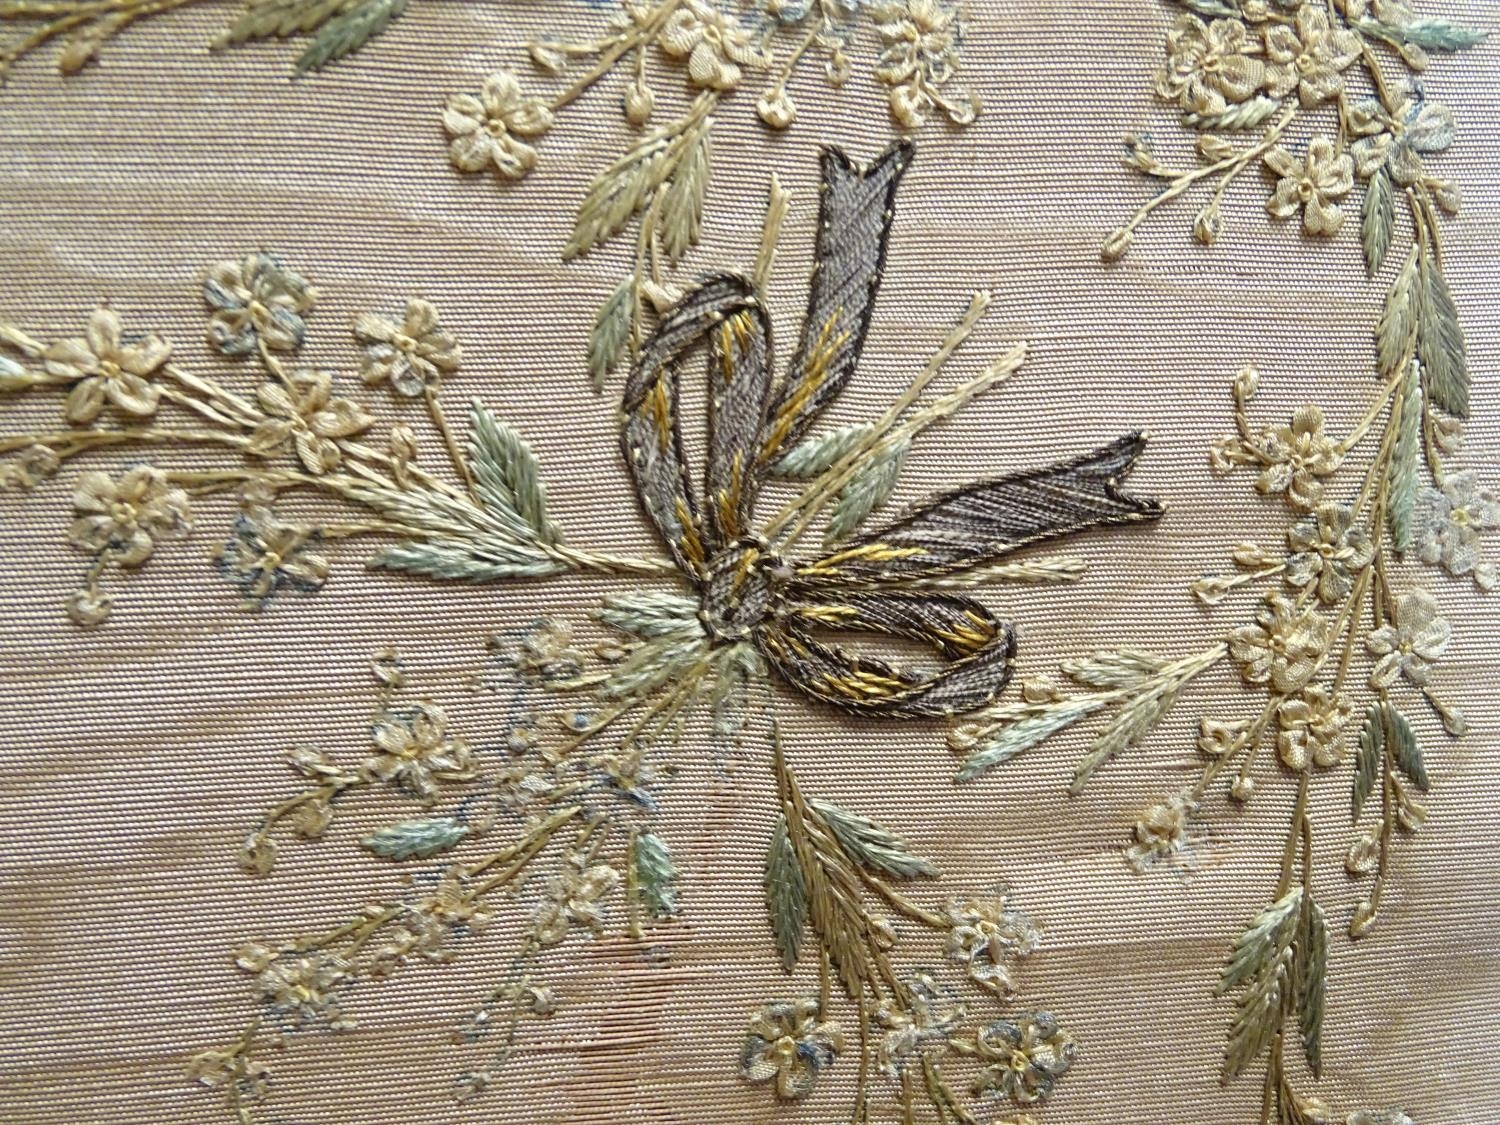 An early 19thC silk needlework with fine floral decoration, bows, swags and a woven basket in a - Image 3 of 10